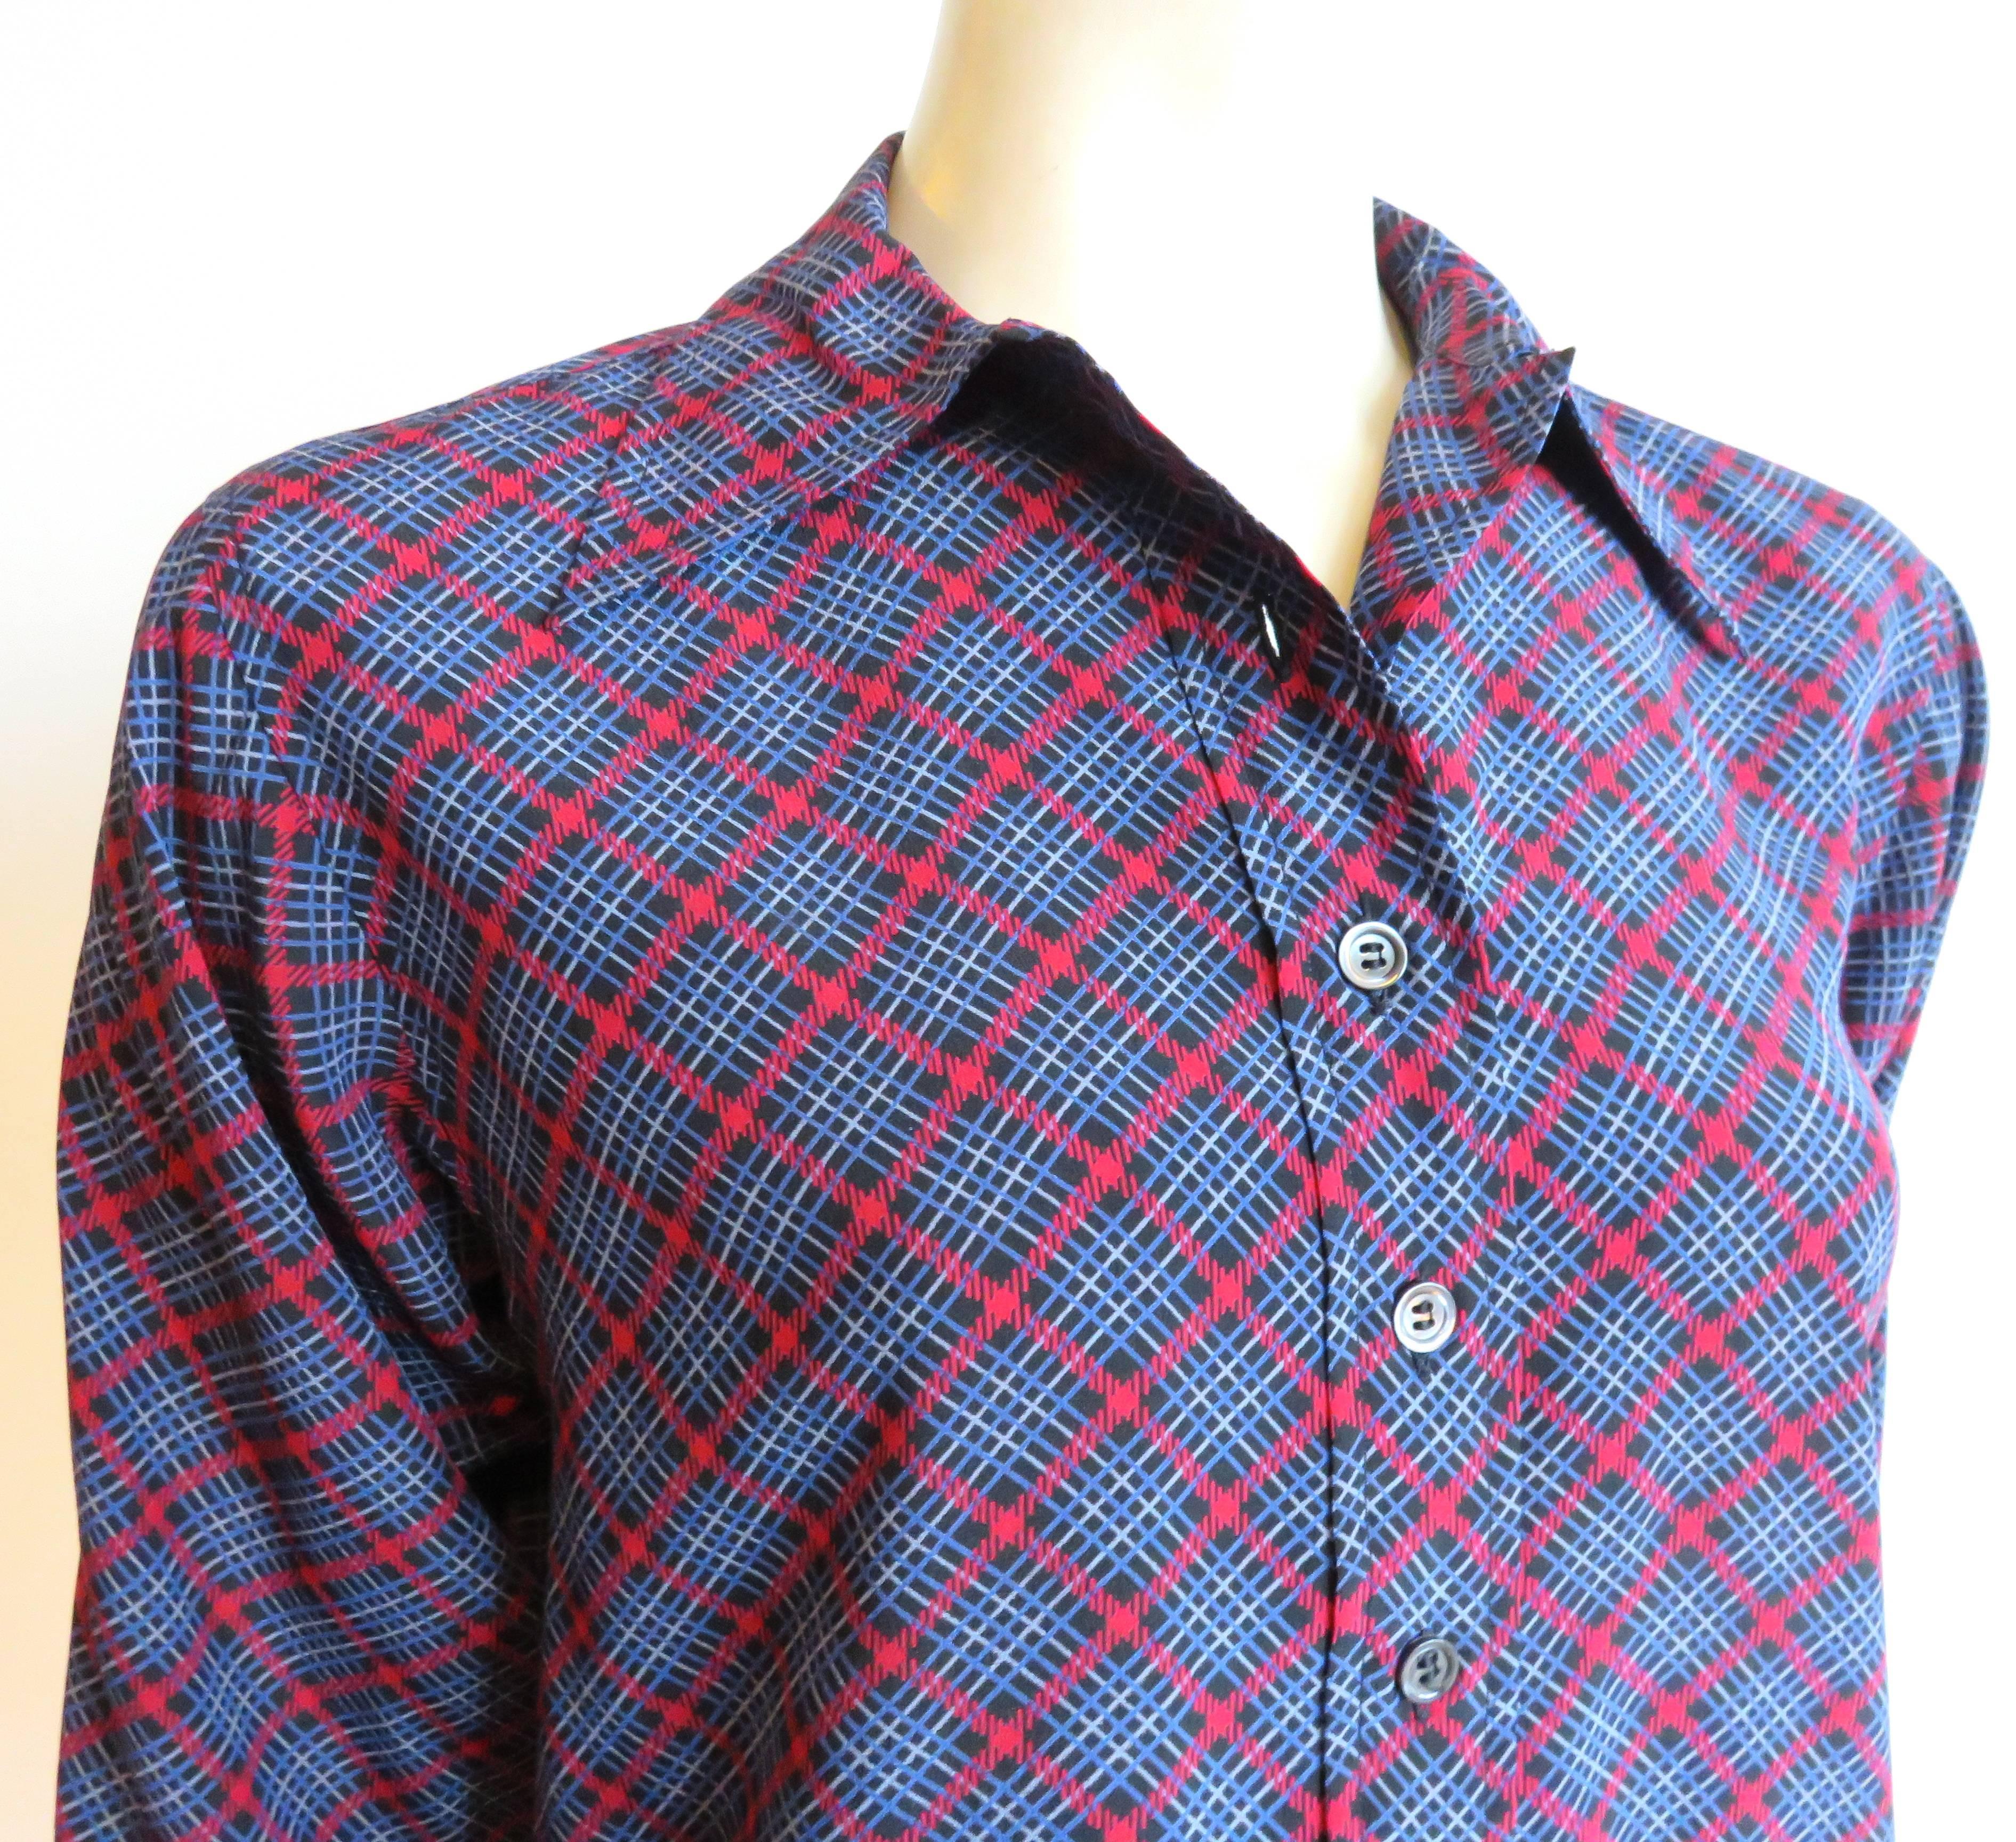 Excellent condition, 1970's YVES SAINT LAURENT Plaid silk blouse top.

Button-down front placket and cuffs.

Made in France, as labeled.

*MEASUREMENTS*

Flat underarm to underarm: 18